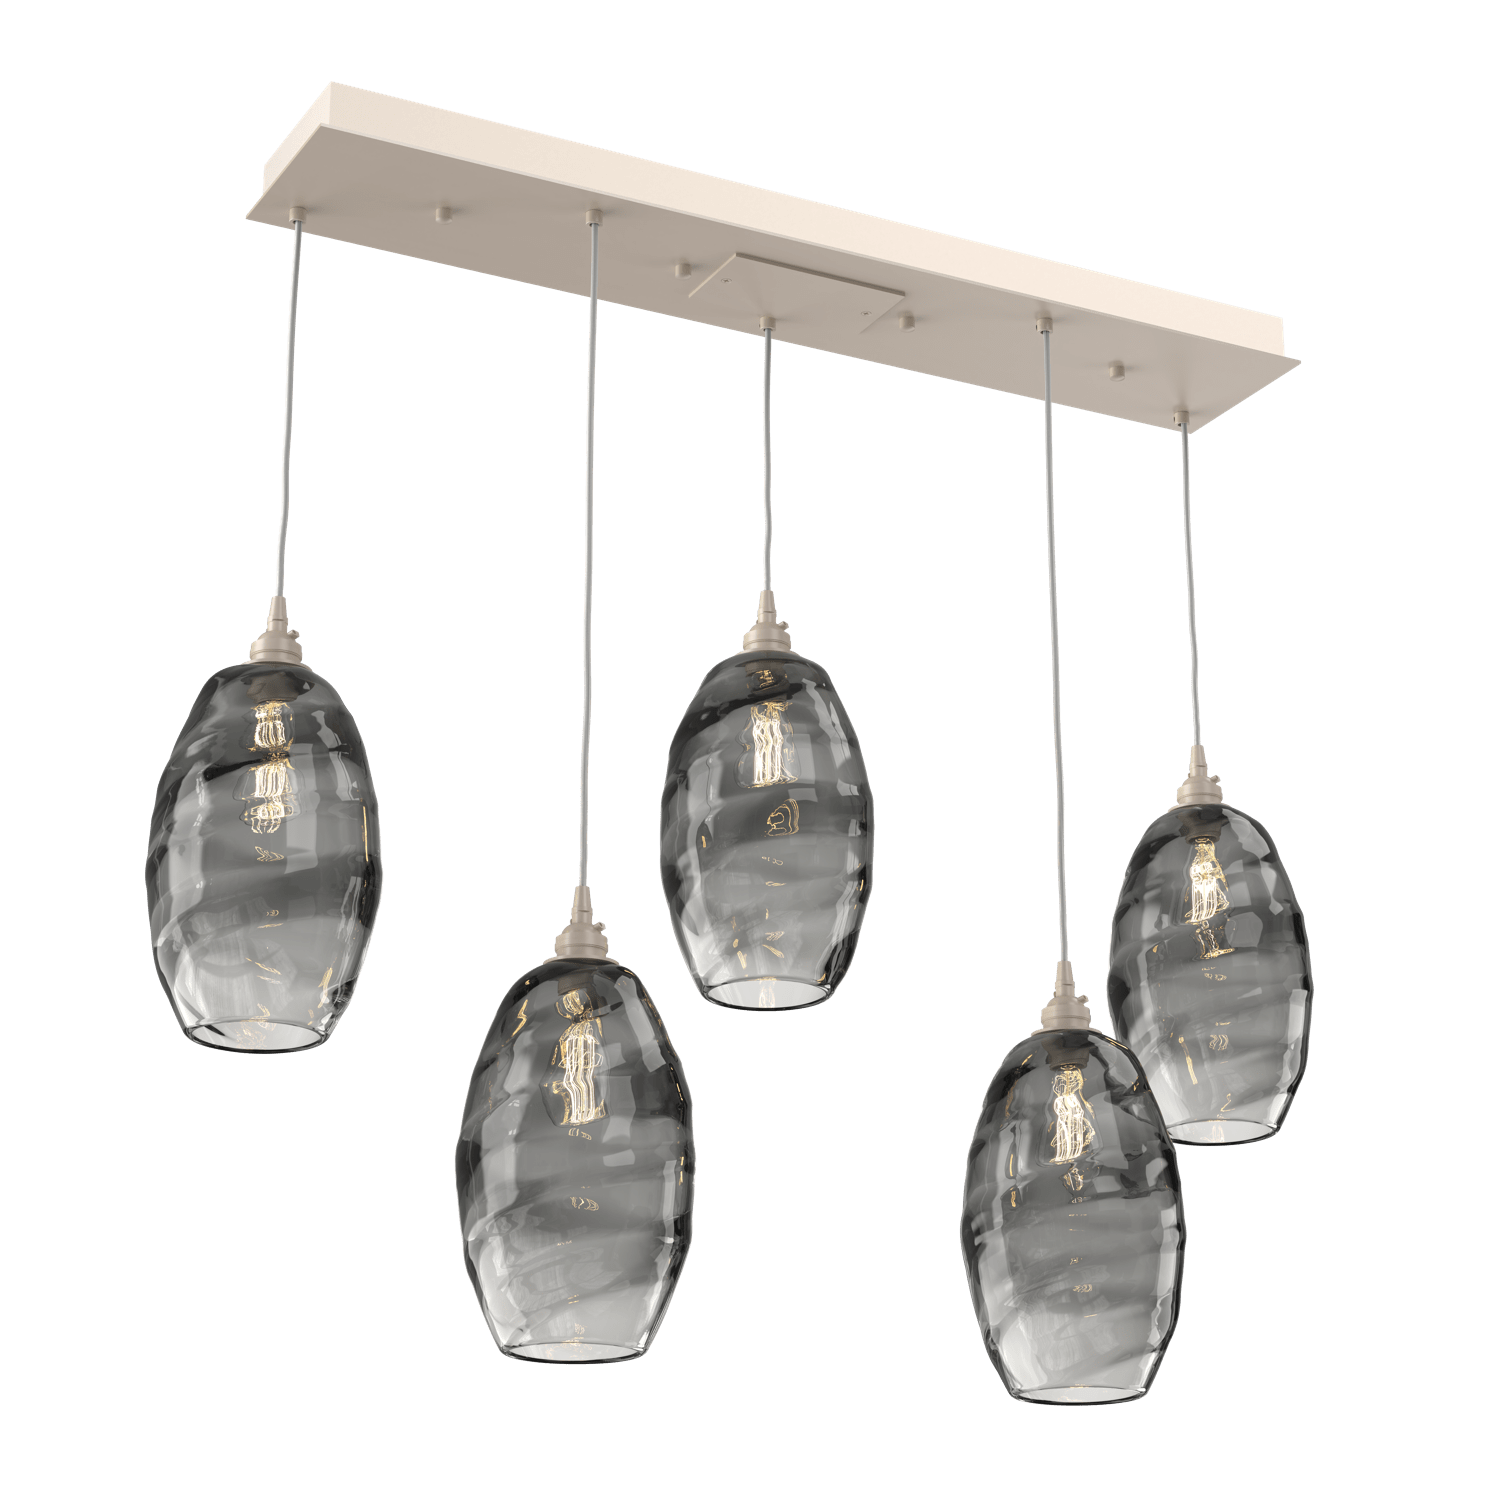 PLB0035-05-BS-OS-Hammerton-Studio-Optic-Blown-Glass-Elisse-5-light-linear-pendant-chandelier-with-metallic-beige-silver-finish-and-optic-smoke-blown-glass-shades-and-incandescent-lamping